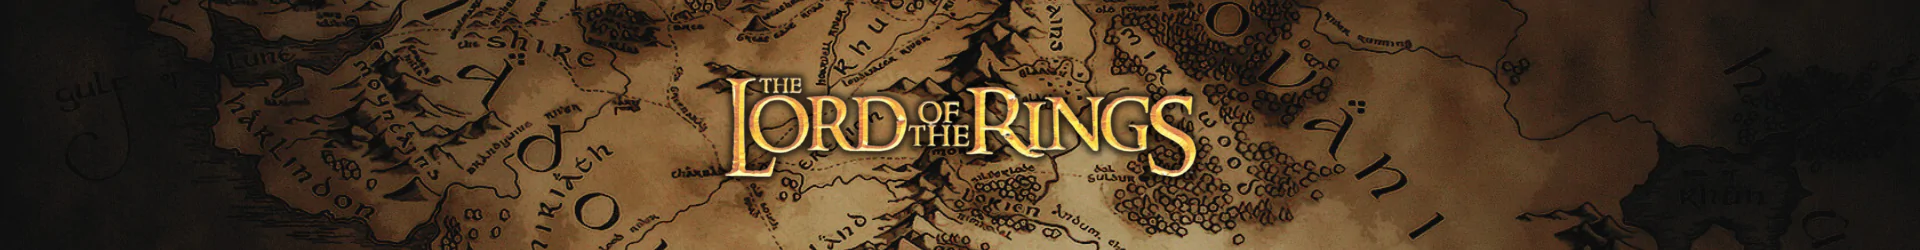 Lord of the Rings karten banner